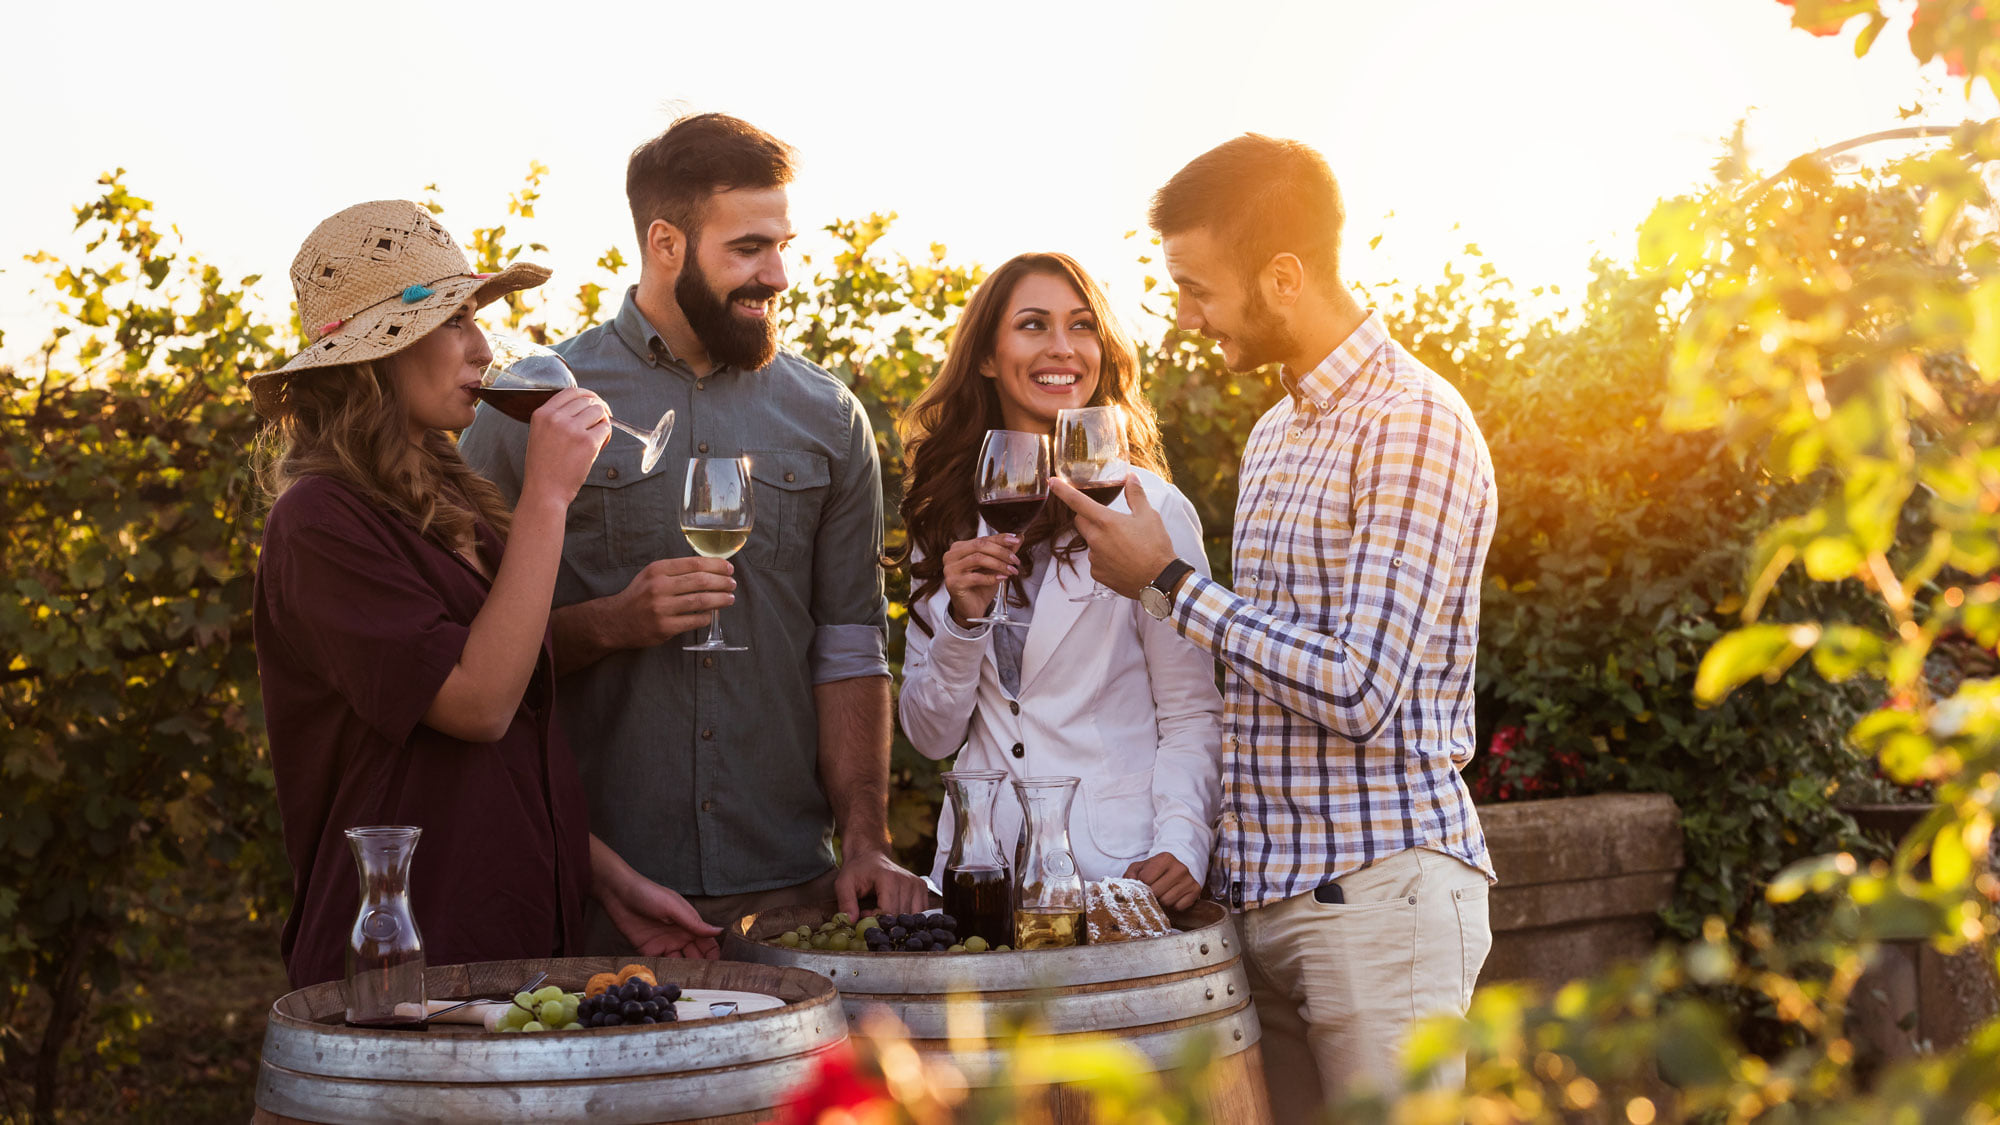 The Gibbston Wine Tasting Tour is a journey through the heart of Central Otago's wine paradise, where you'll sample handcrafted wines, meet passionate winemakers, and learn about the art of winemaking